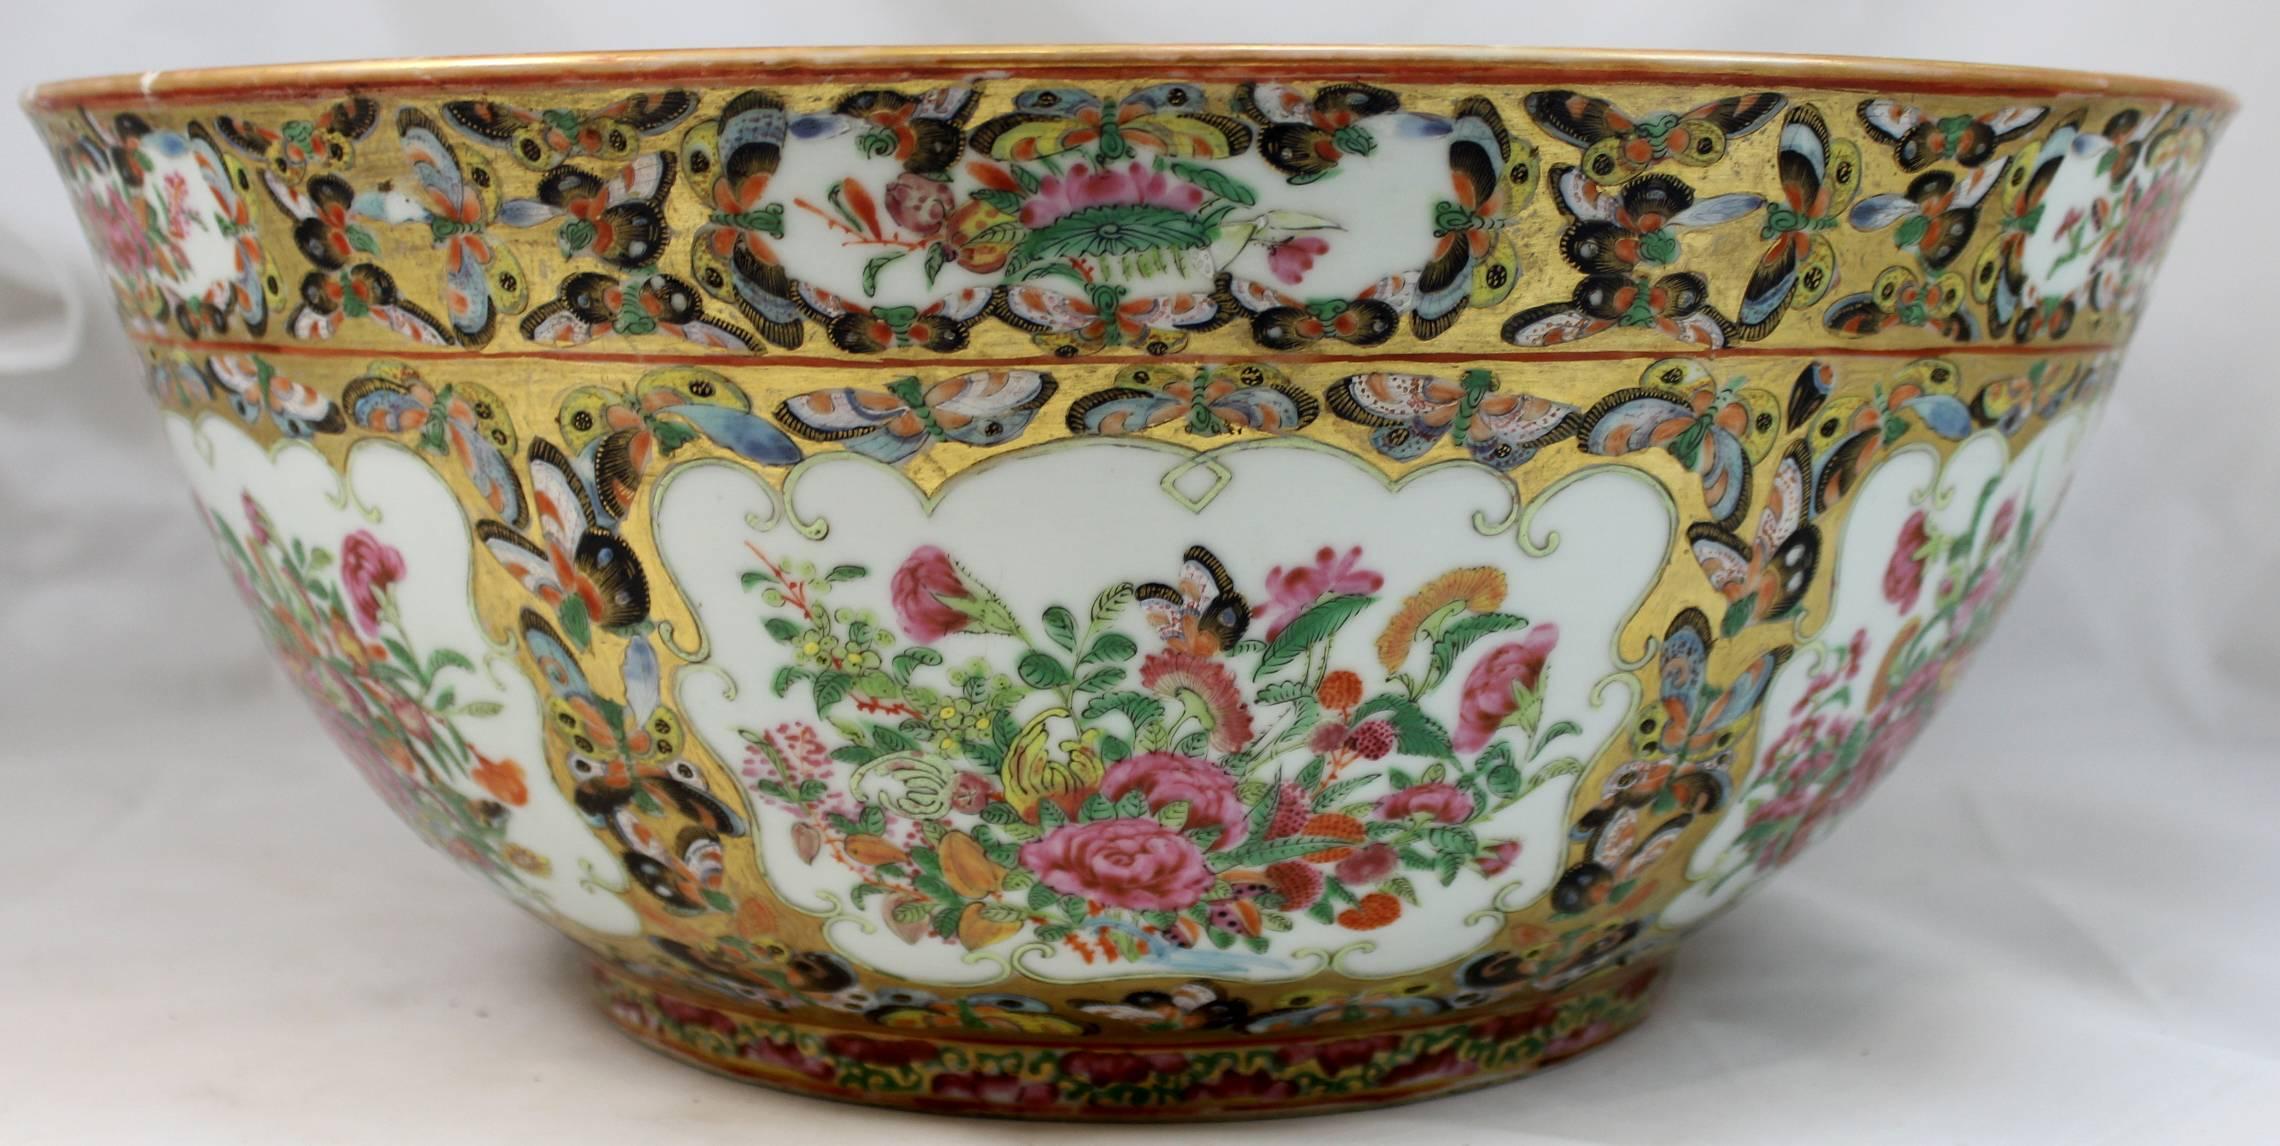 A spectacular example of a Chinese Export black butterfly punch bowl with central foliate round interior panel surrounded by six decorated foliate panels accented with gilt and black butterflies bordering and incorporated into each panel. The